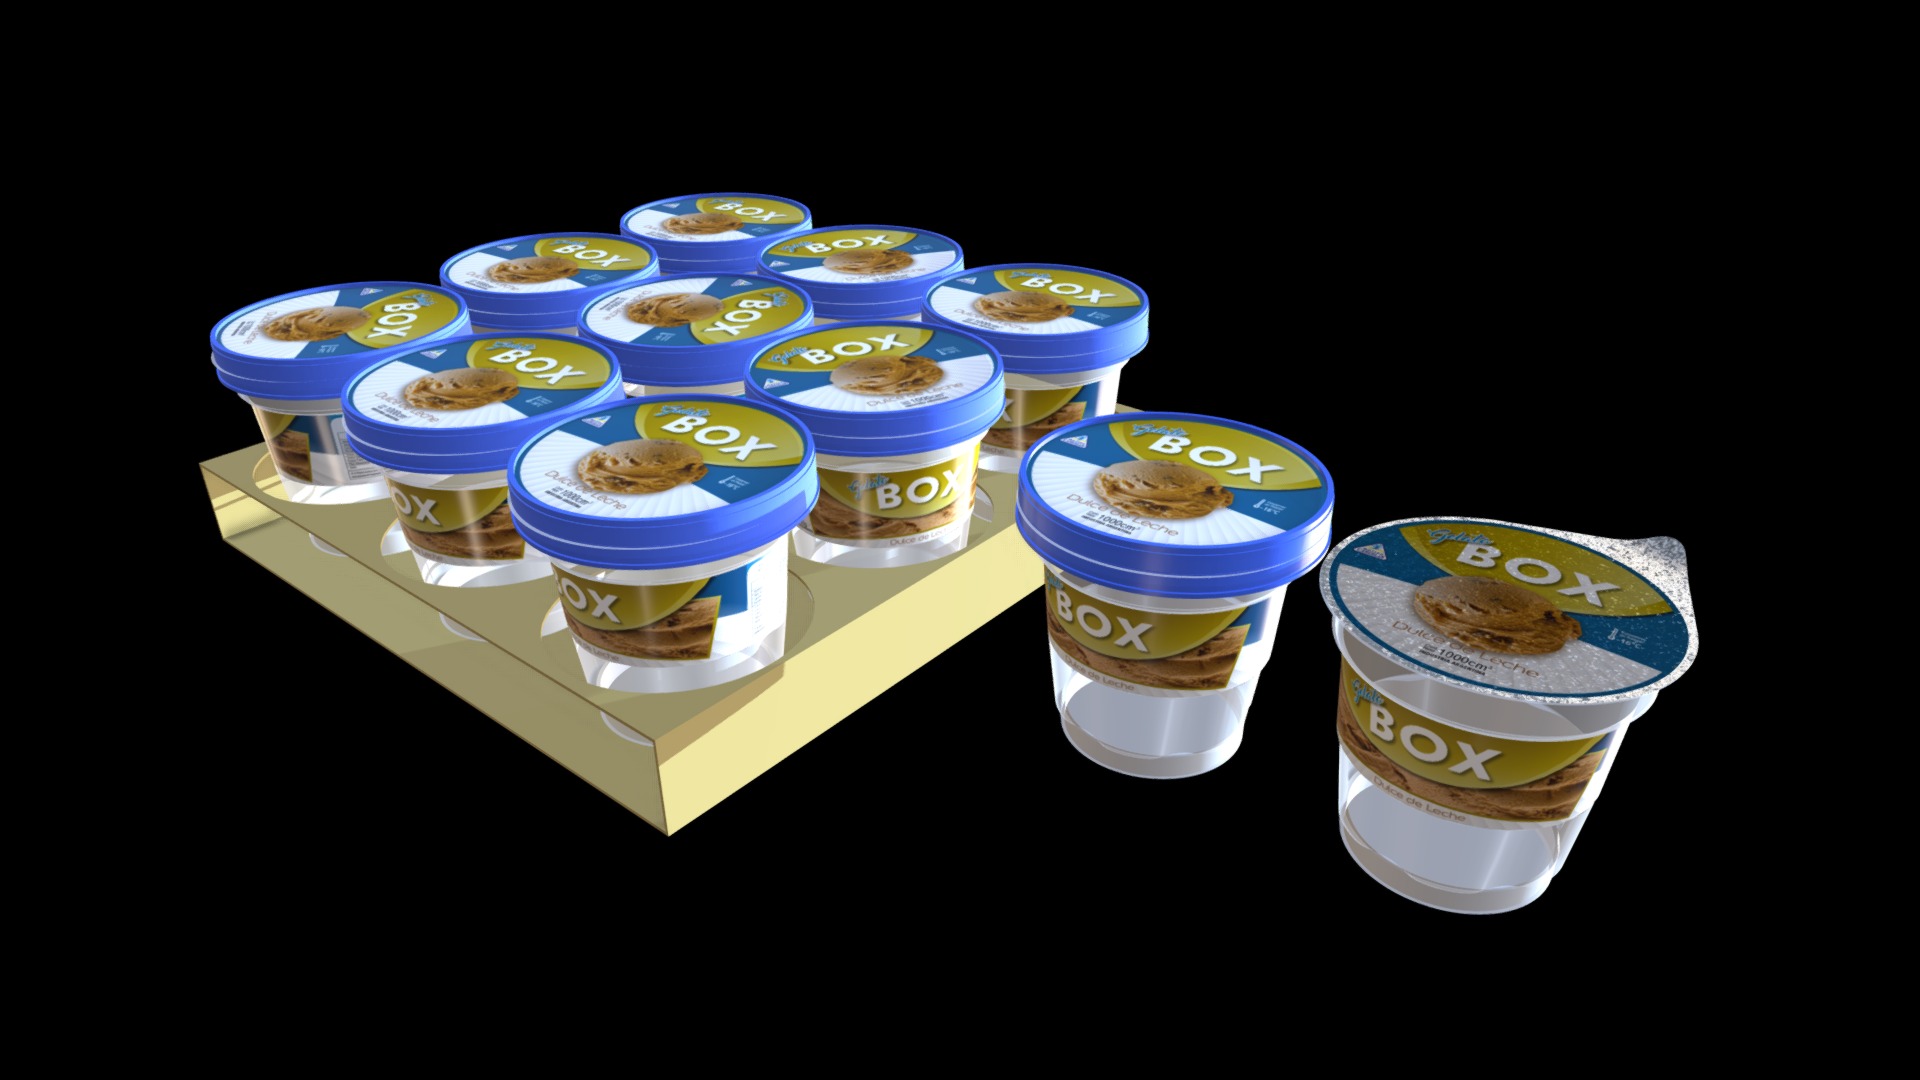 3D model Box Maple - This is a 3D model of the Box Maple. The 3D model is about a group of blue and white bowls.